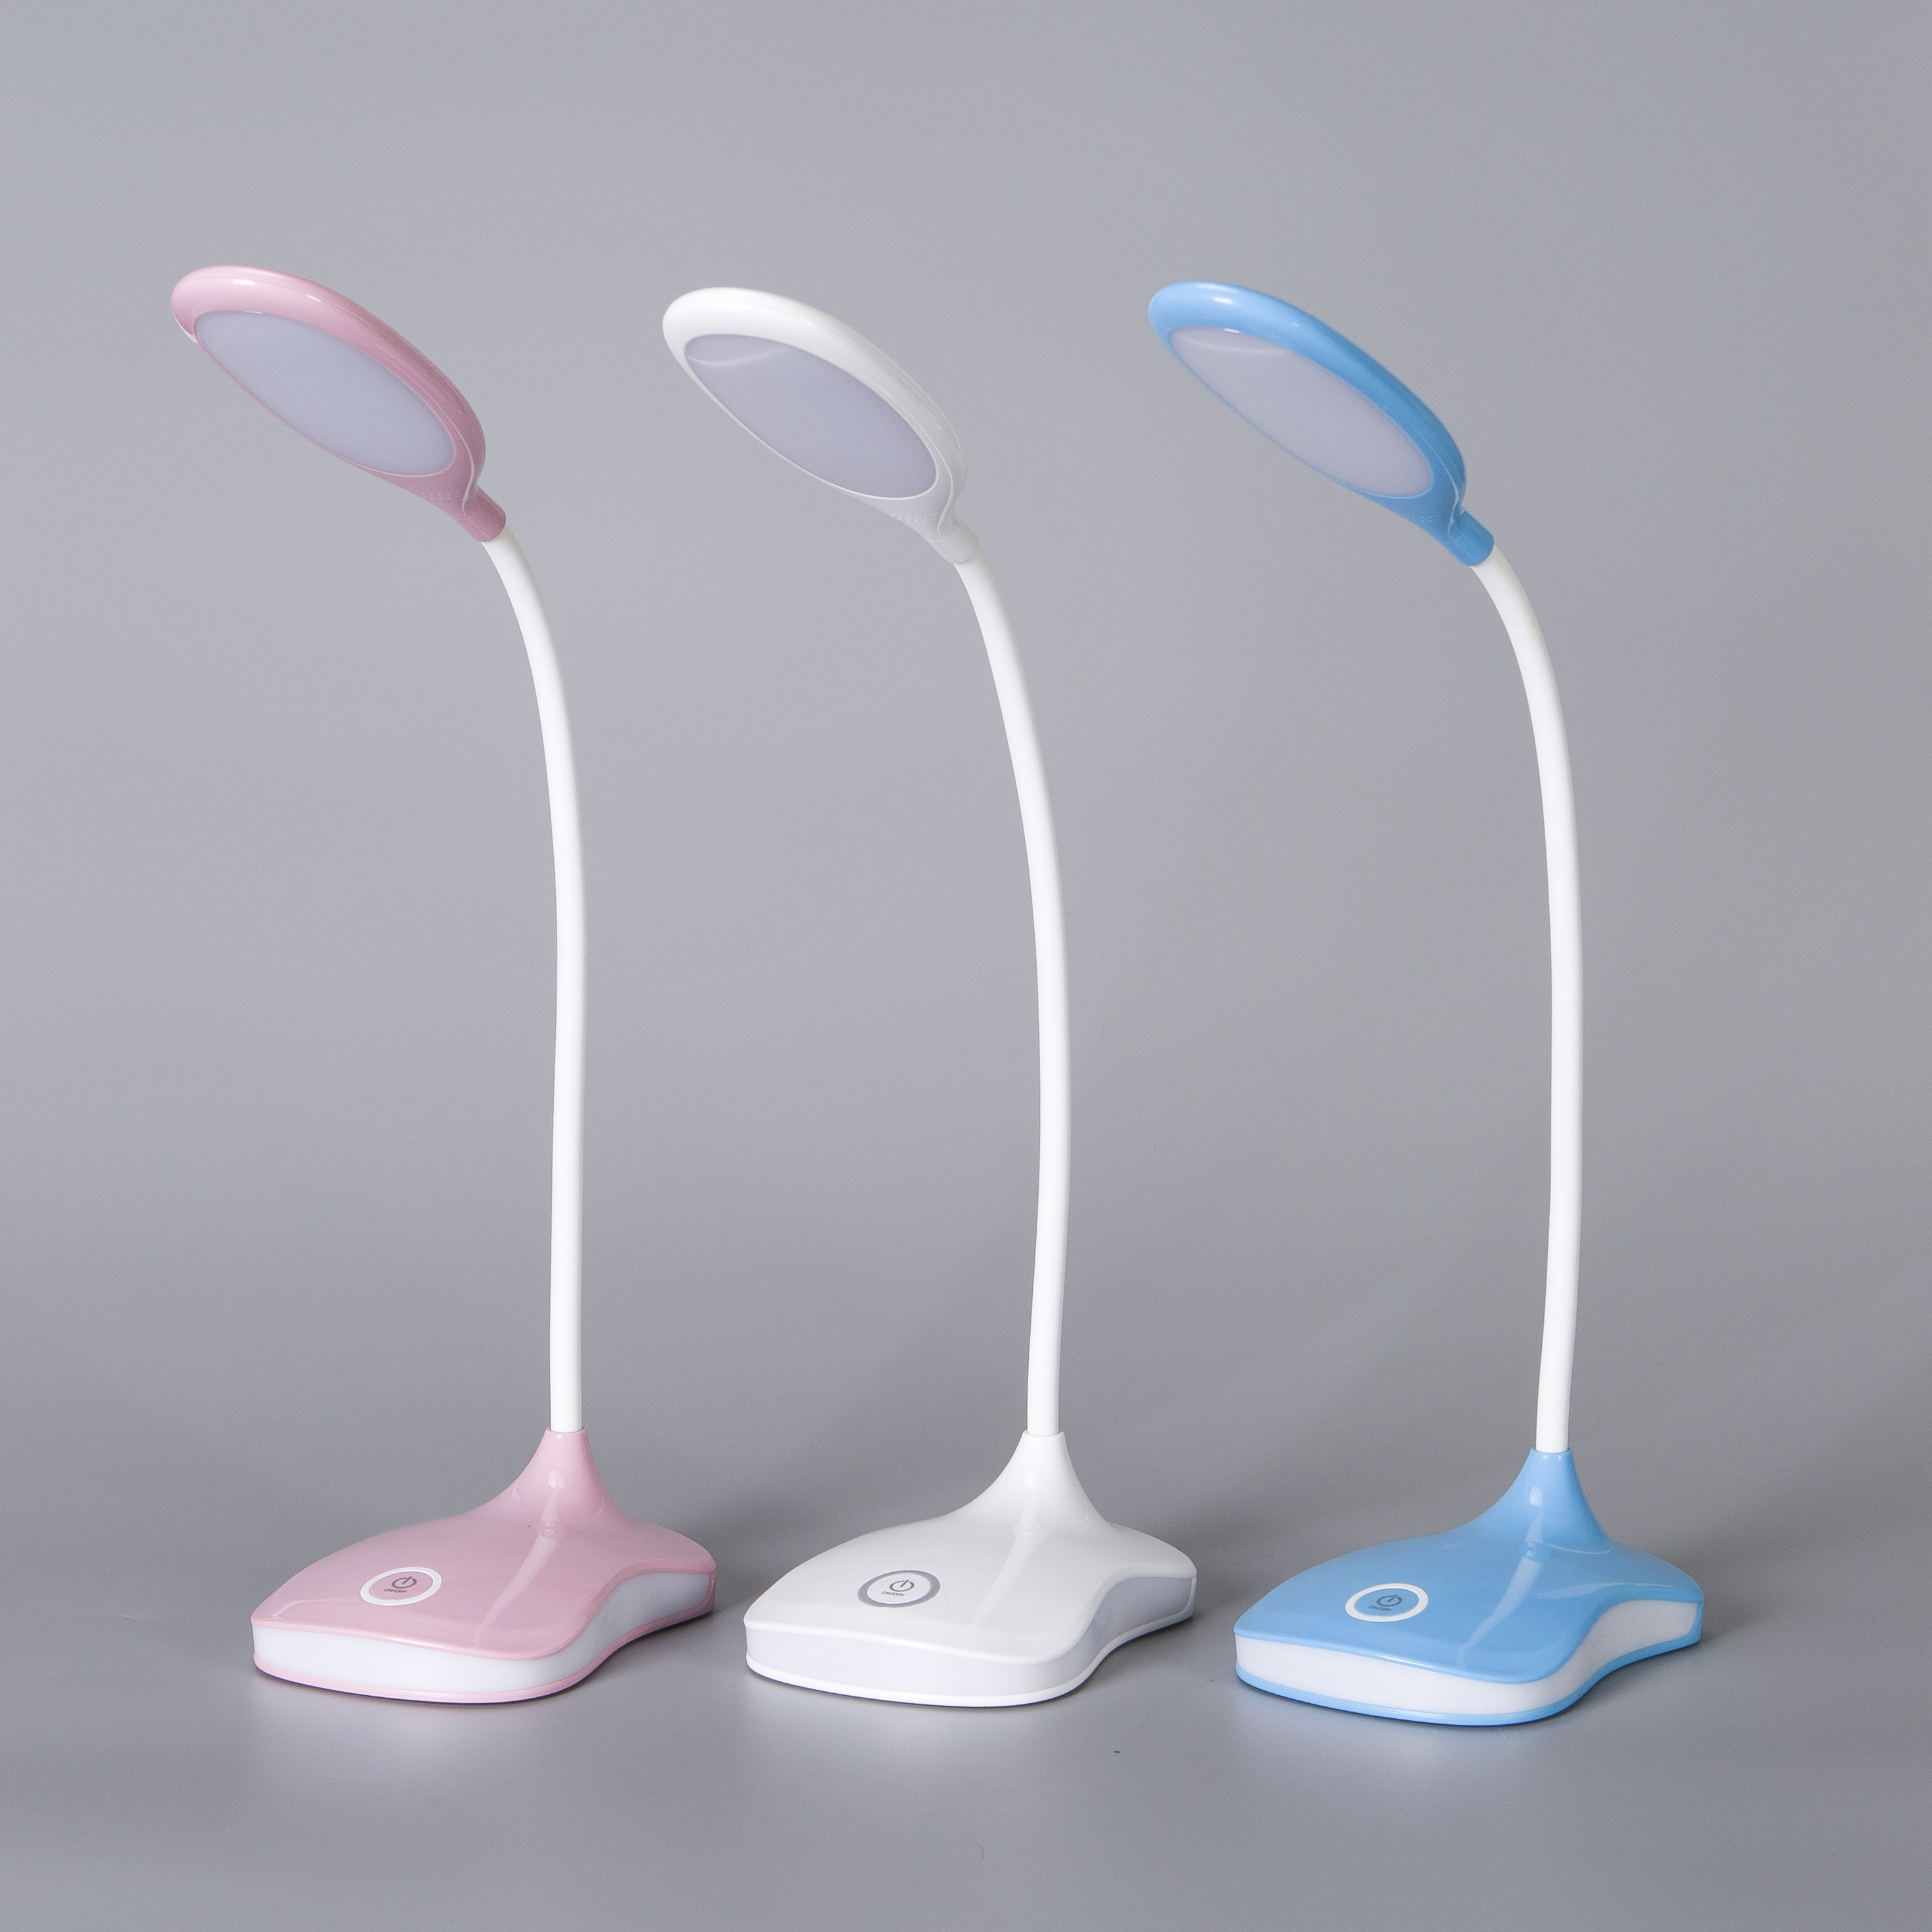 Multifunctional desk lamp with color aperture at the bottom